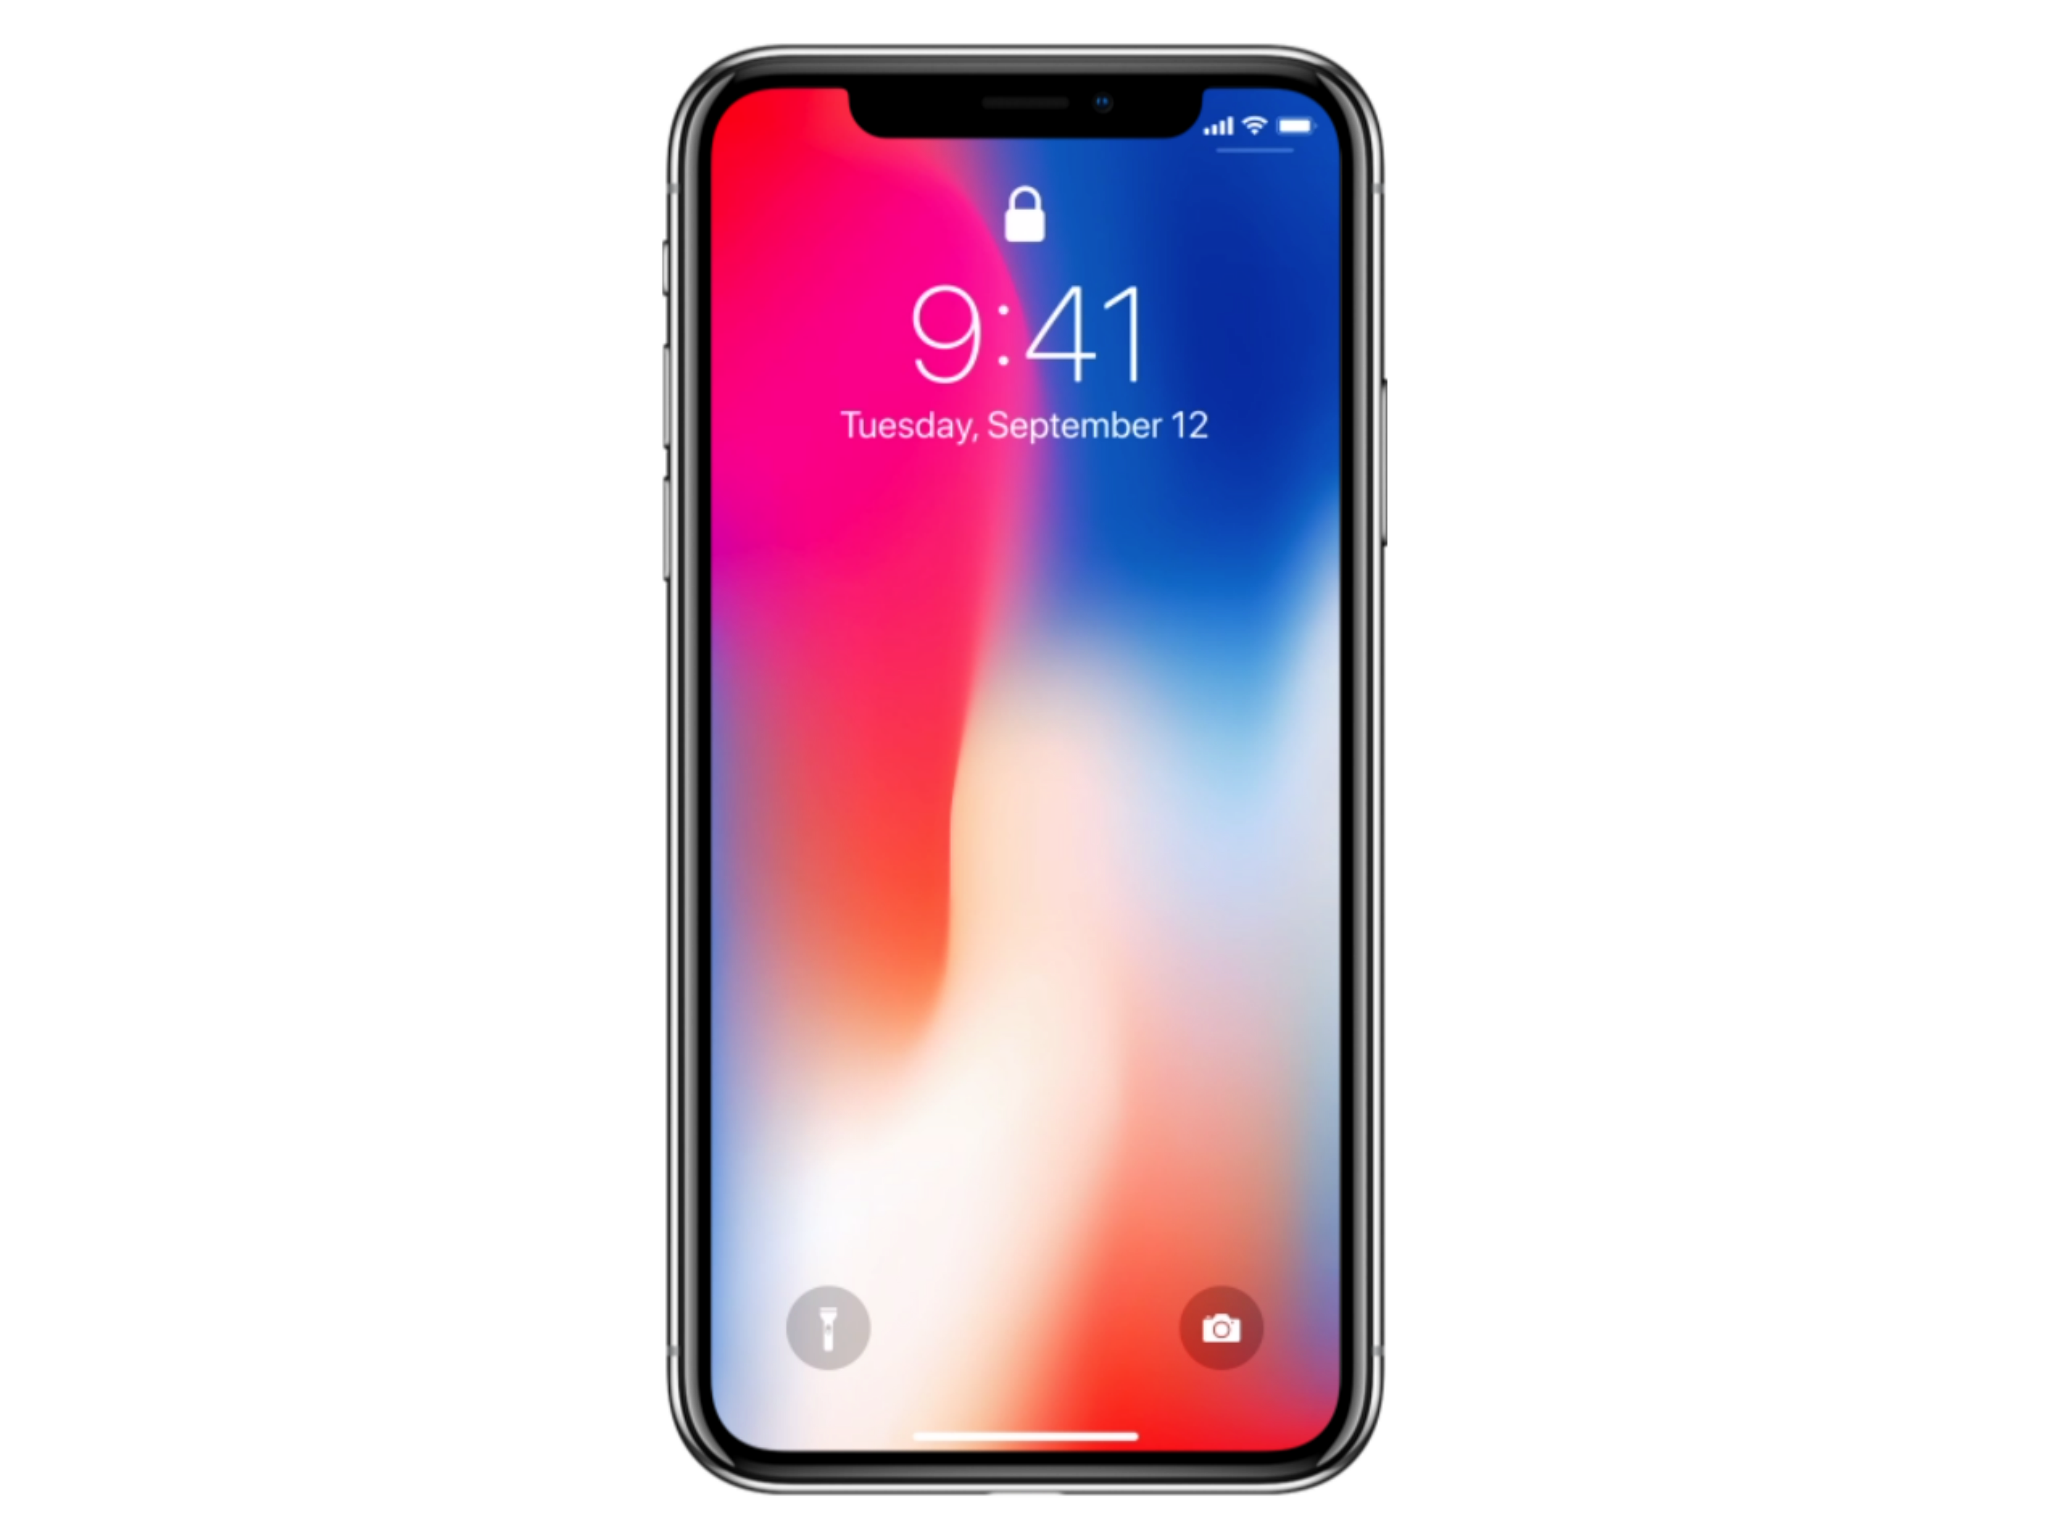 iPhone X features: A leap forward for Apple but Samsung is still ahead